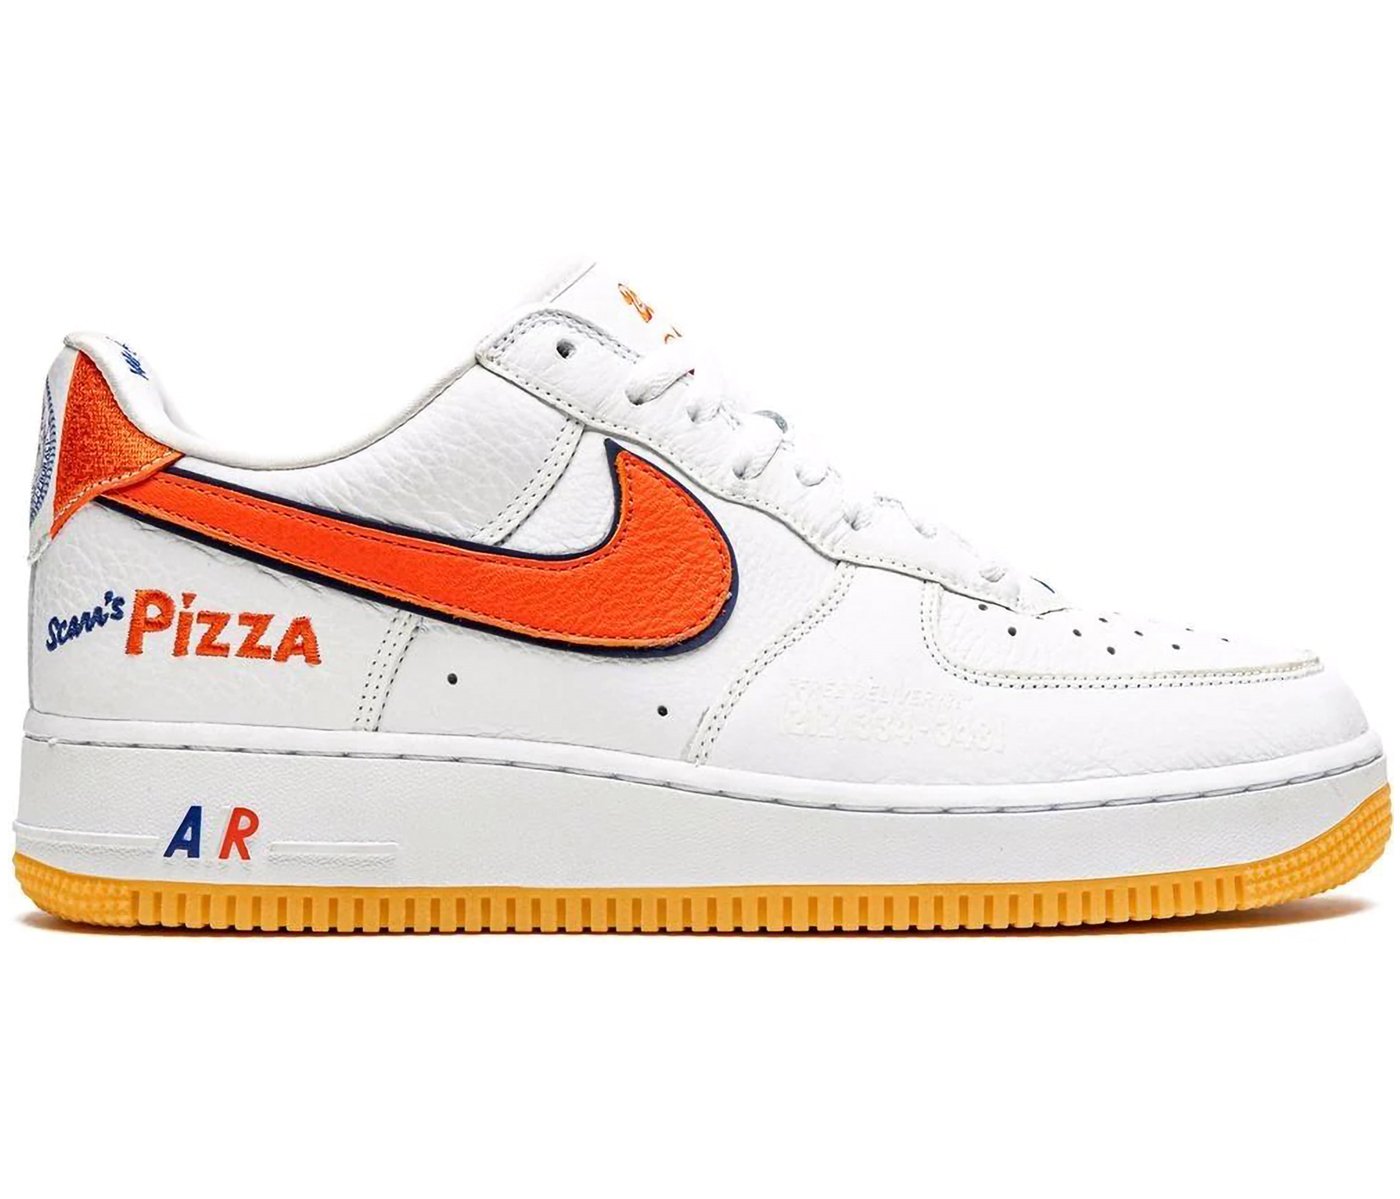 sneakers Nike Air Force 1 Low Scarr's Pizza